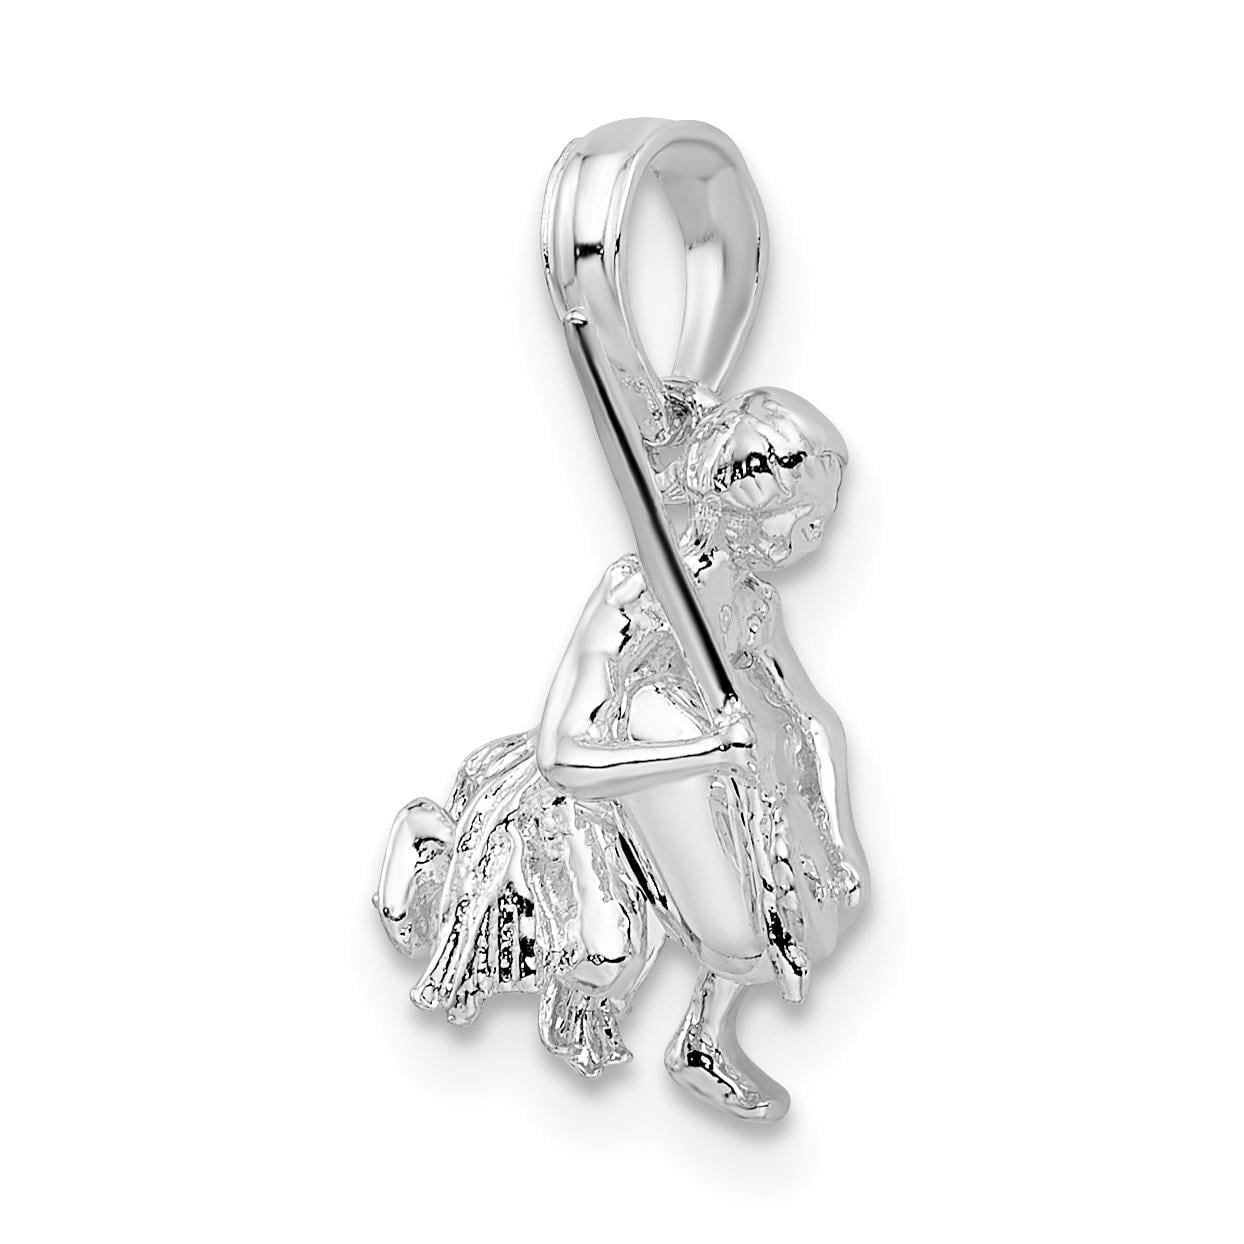 Million Charms 925 Sterling Silver Nautical Sea Shore Charm, Polished 3D  Island Warrior Pendant